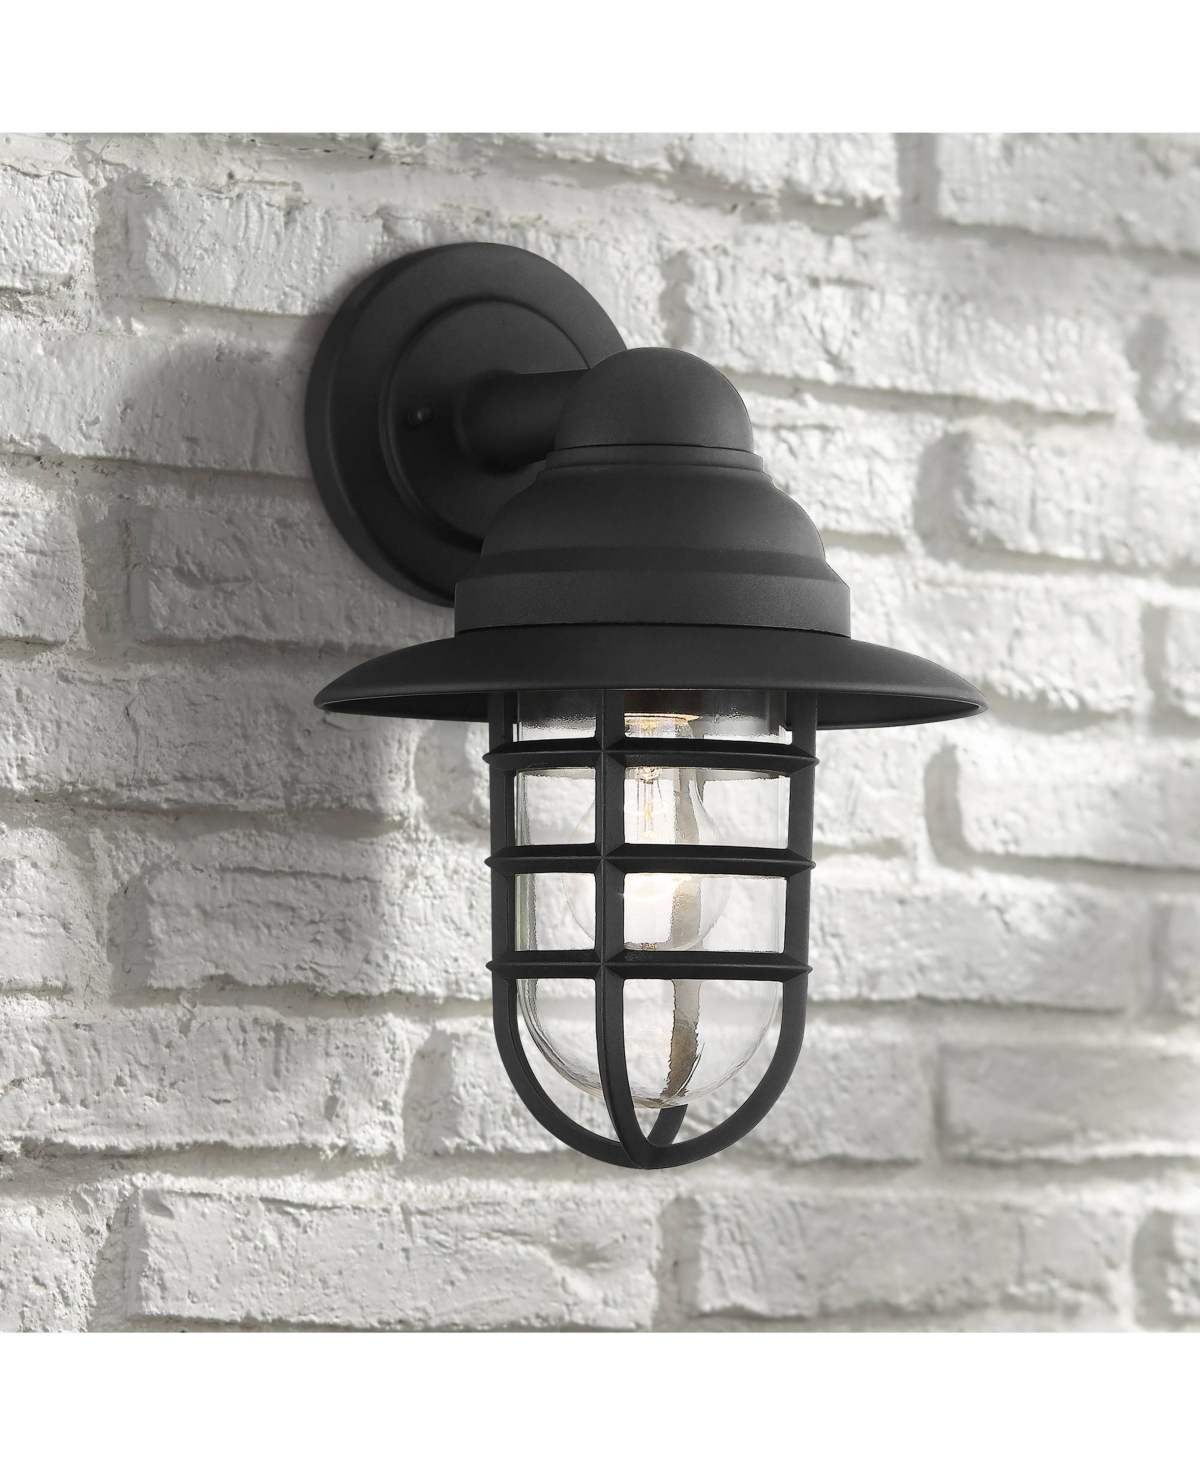 Marlowe Rustic Industrial Farmhouse Outdoor Wall Light Fixture Black Hooded Cage 13" Clear Glass for Exterior Barn Deck House Porch Yard Patio Outside